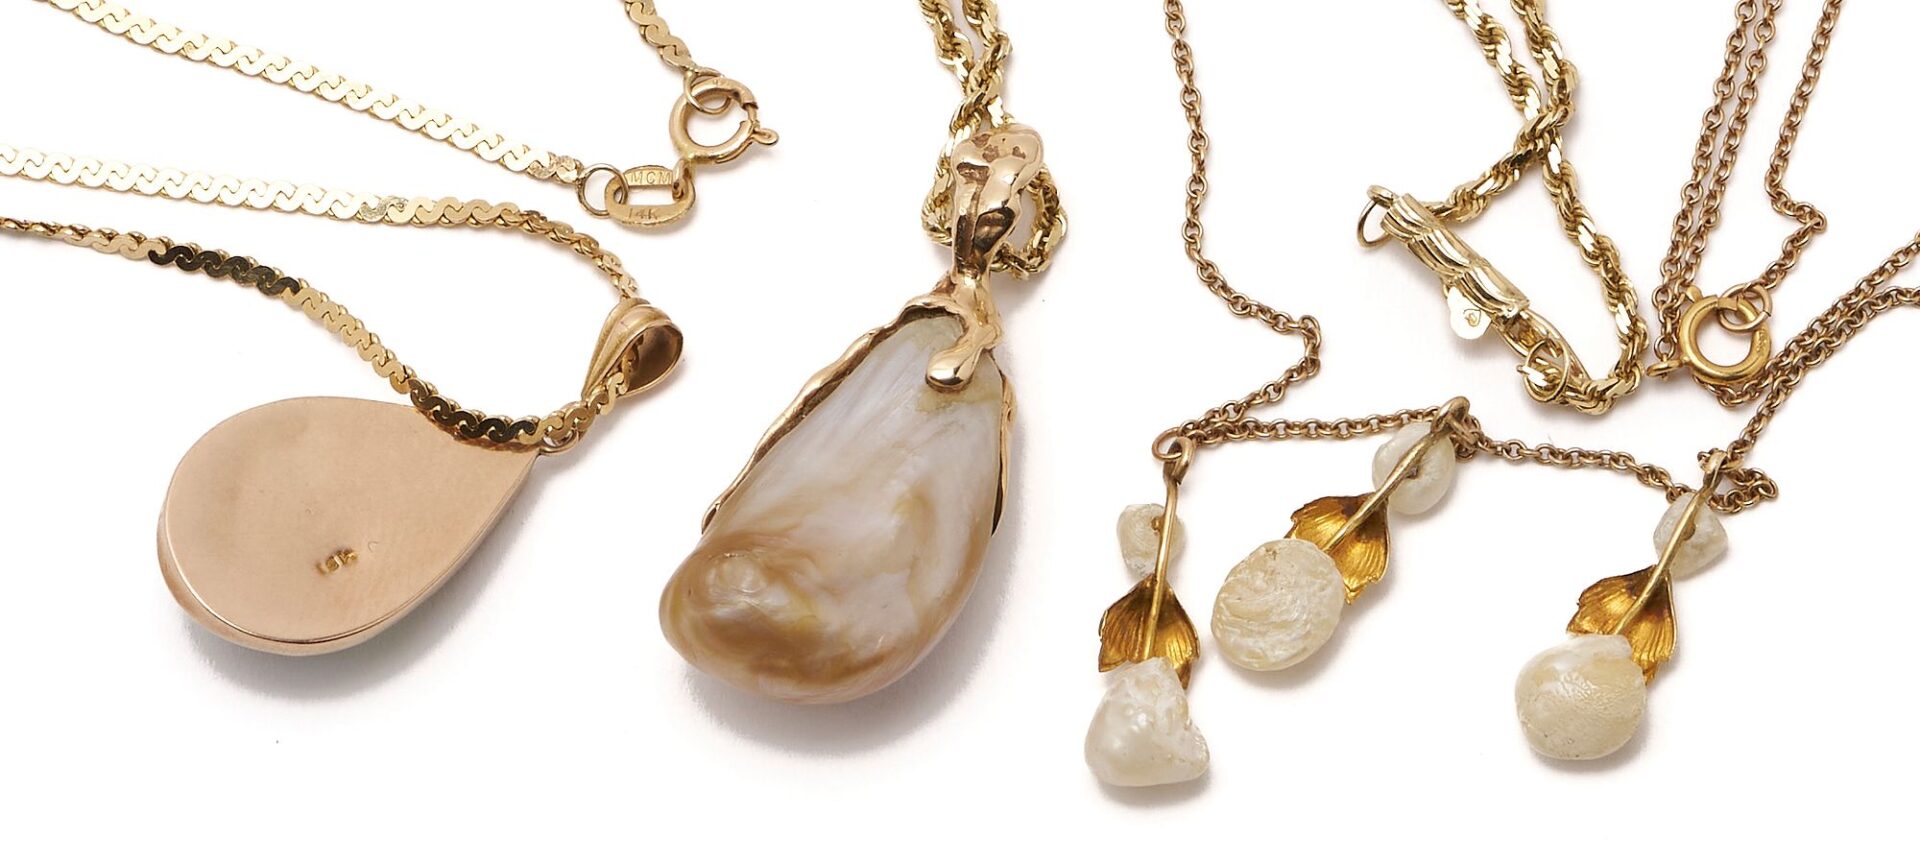 Lot 842: Three (3) 14k Gold & Pearl Necklaces